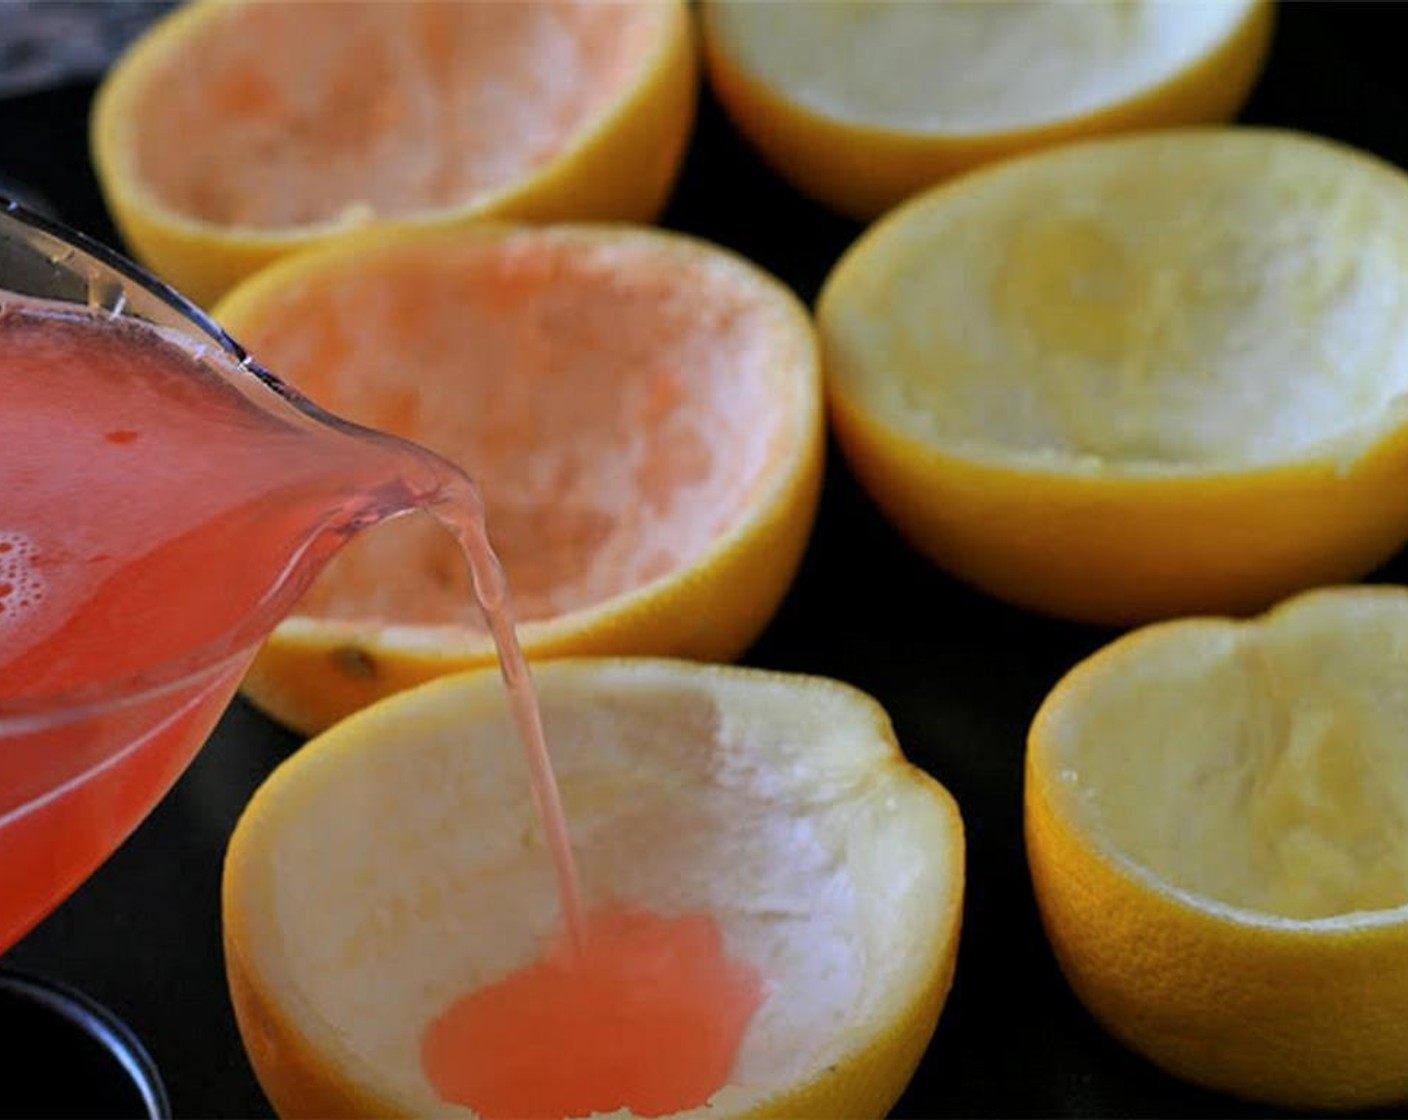 step 5 Pour in Grapefruit Vodka (3/4 cup) and Water (1/4 cup) and transfer to something with a pour spout, such as a measuring cup. Place grapefruit halves in a muffin pan to keep them stabilized and pour in the grapefruit juice mixture.